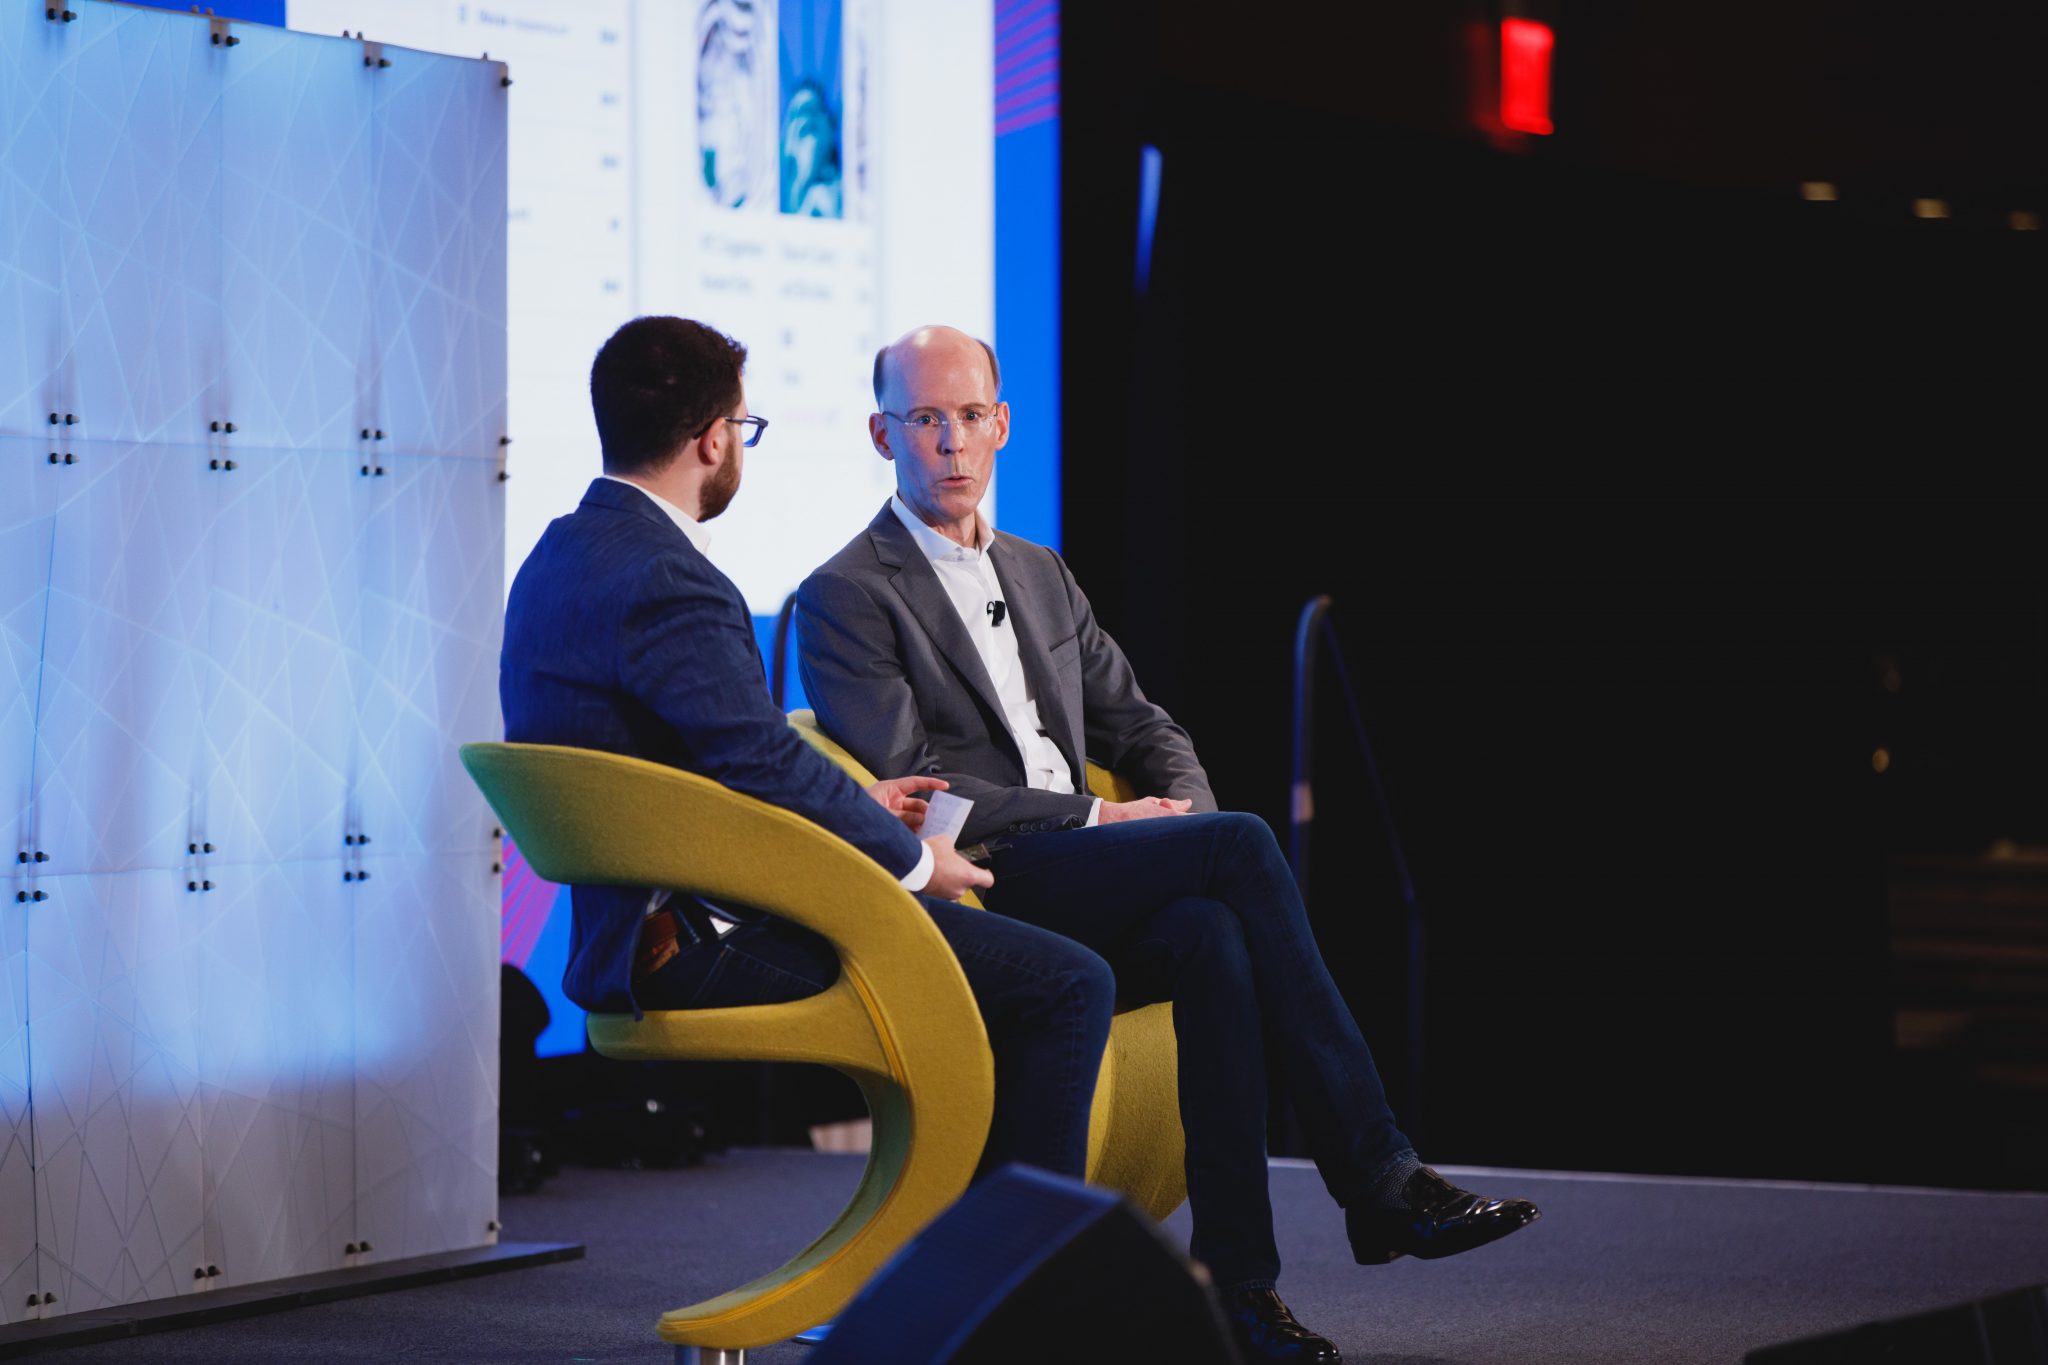 Google VP and GM of Travel Richard Holden (right) in discussion with Skift Sr. Research Analyst Seth Borko at Skift Global Forum, Sept. 22, 2021.